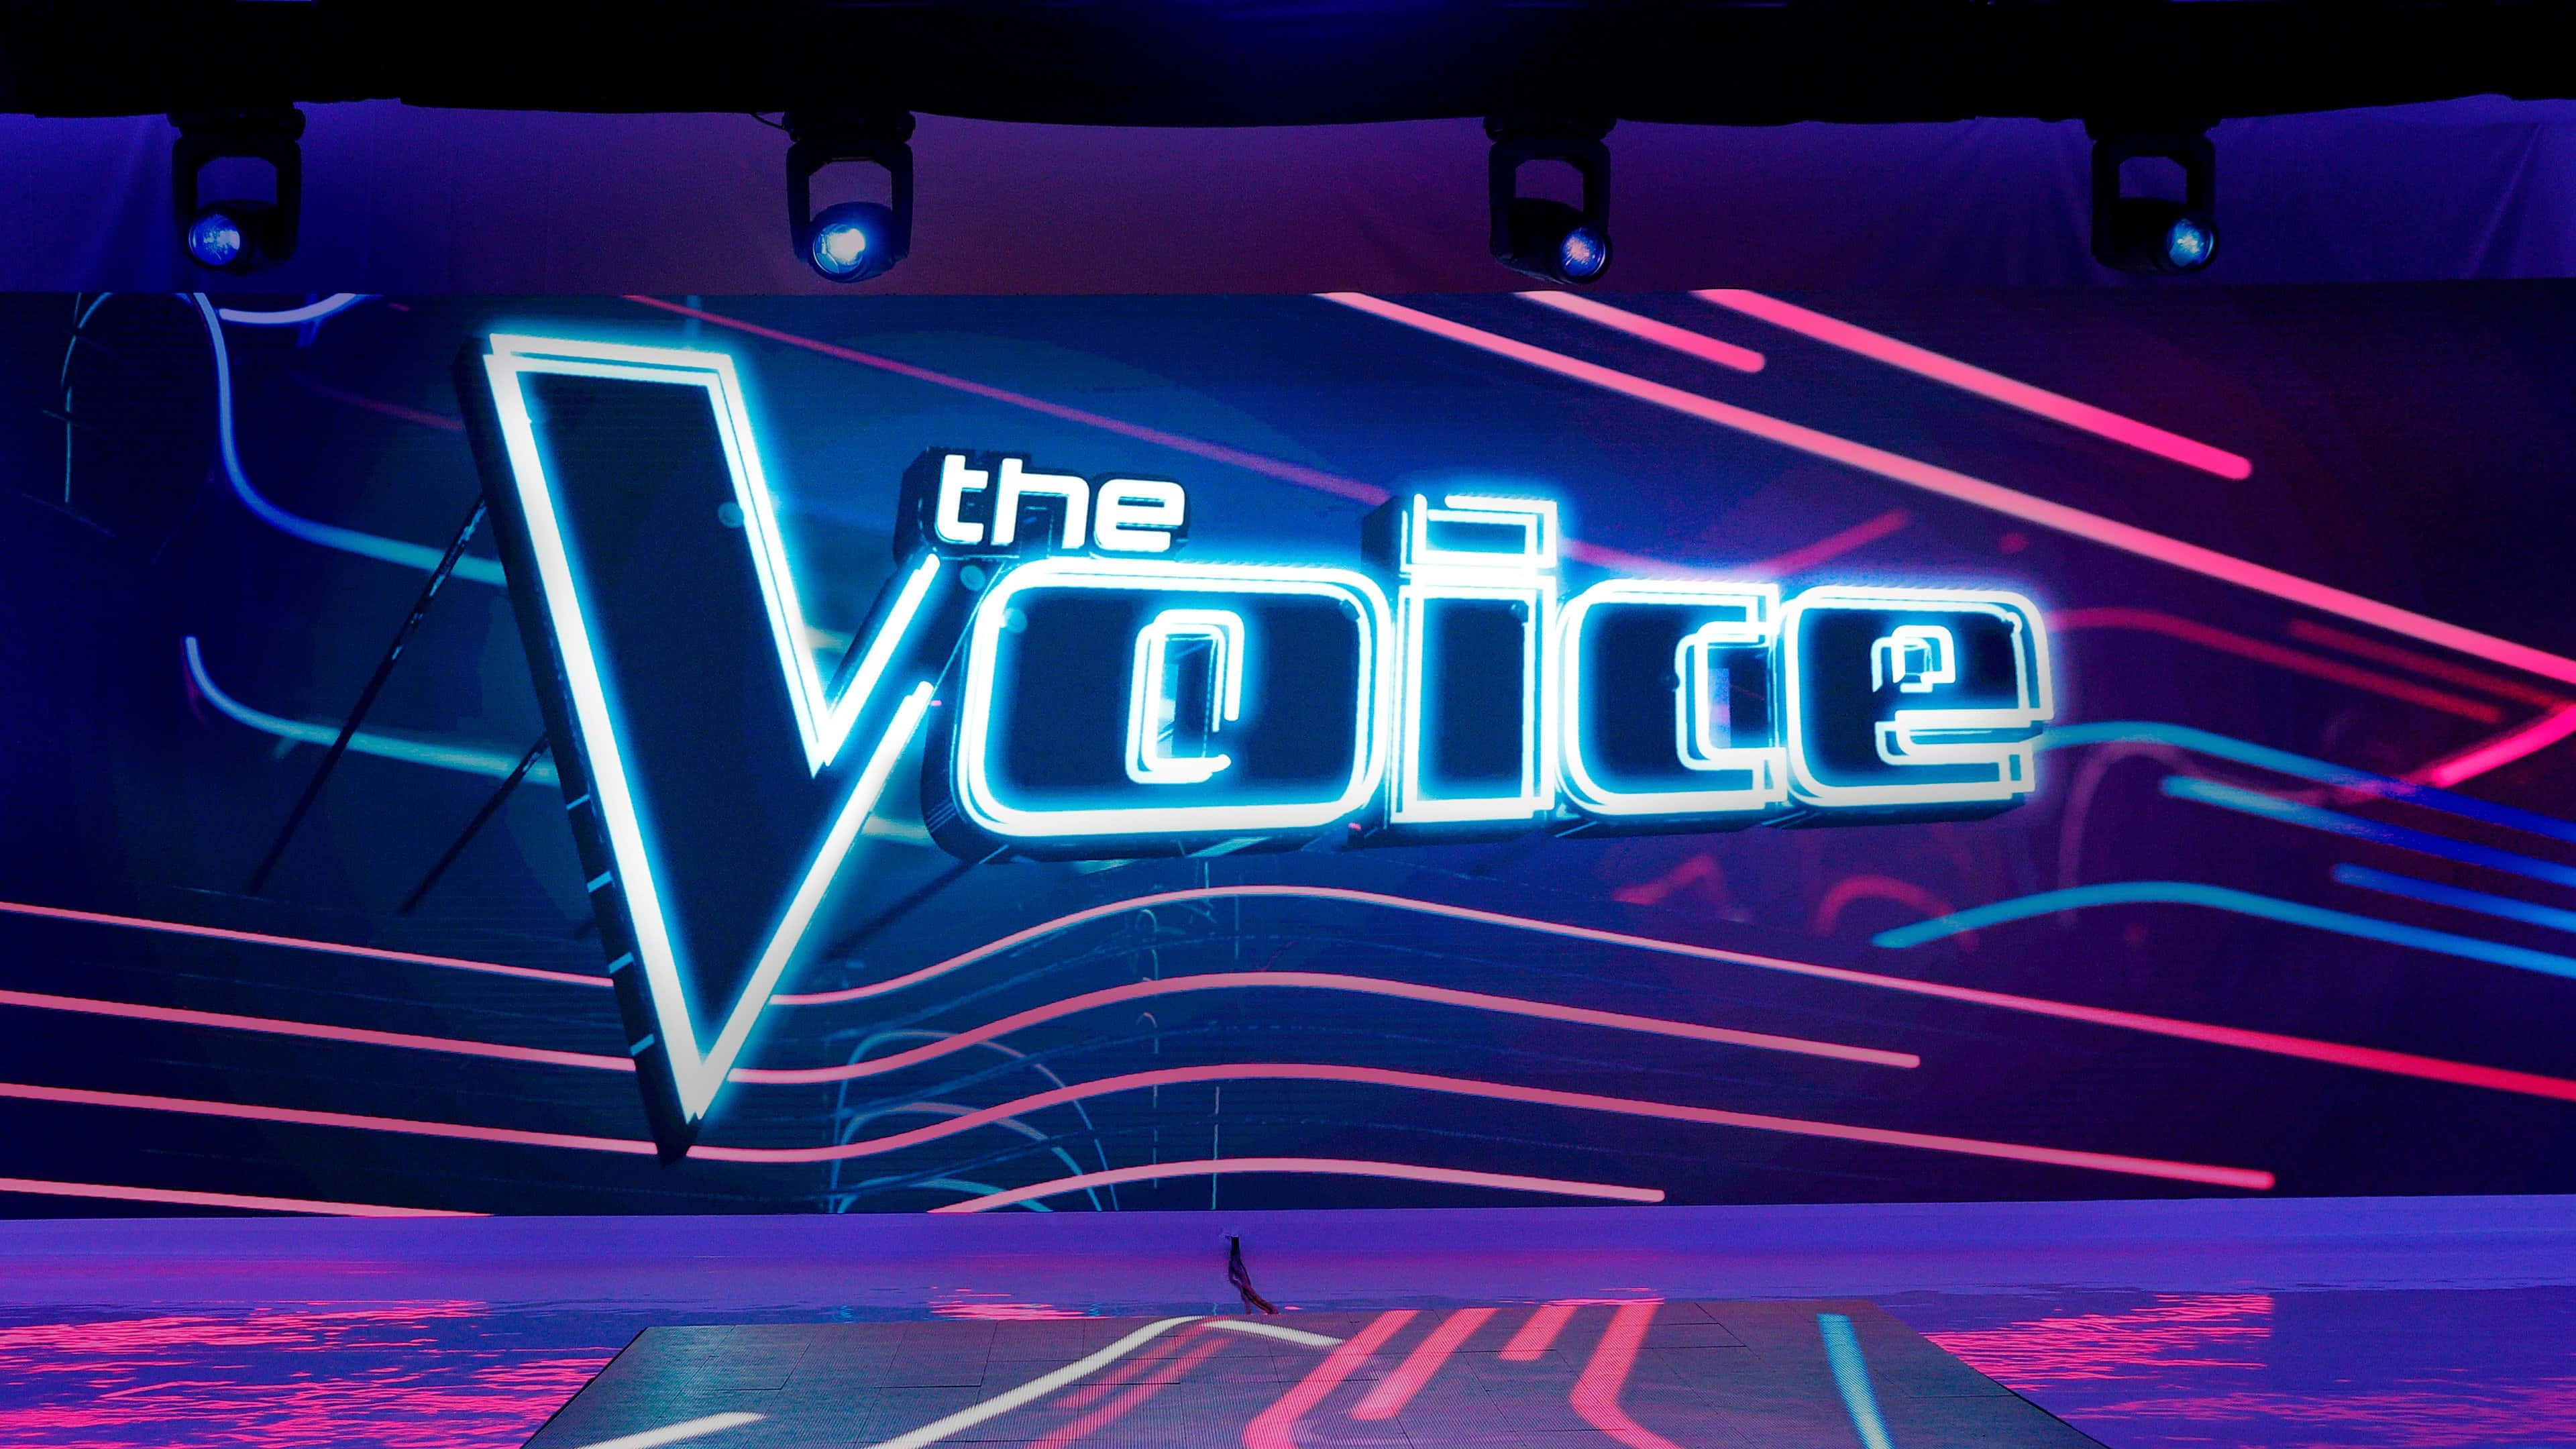 Download The Voice Wallpaper | Wallpapers.com